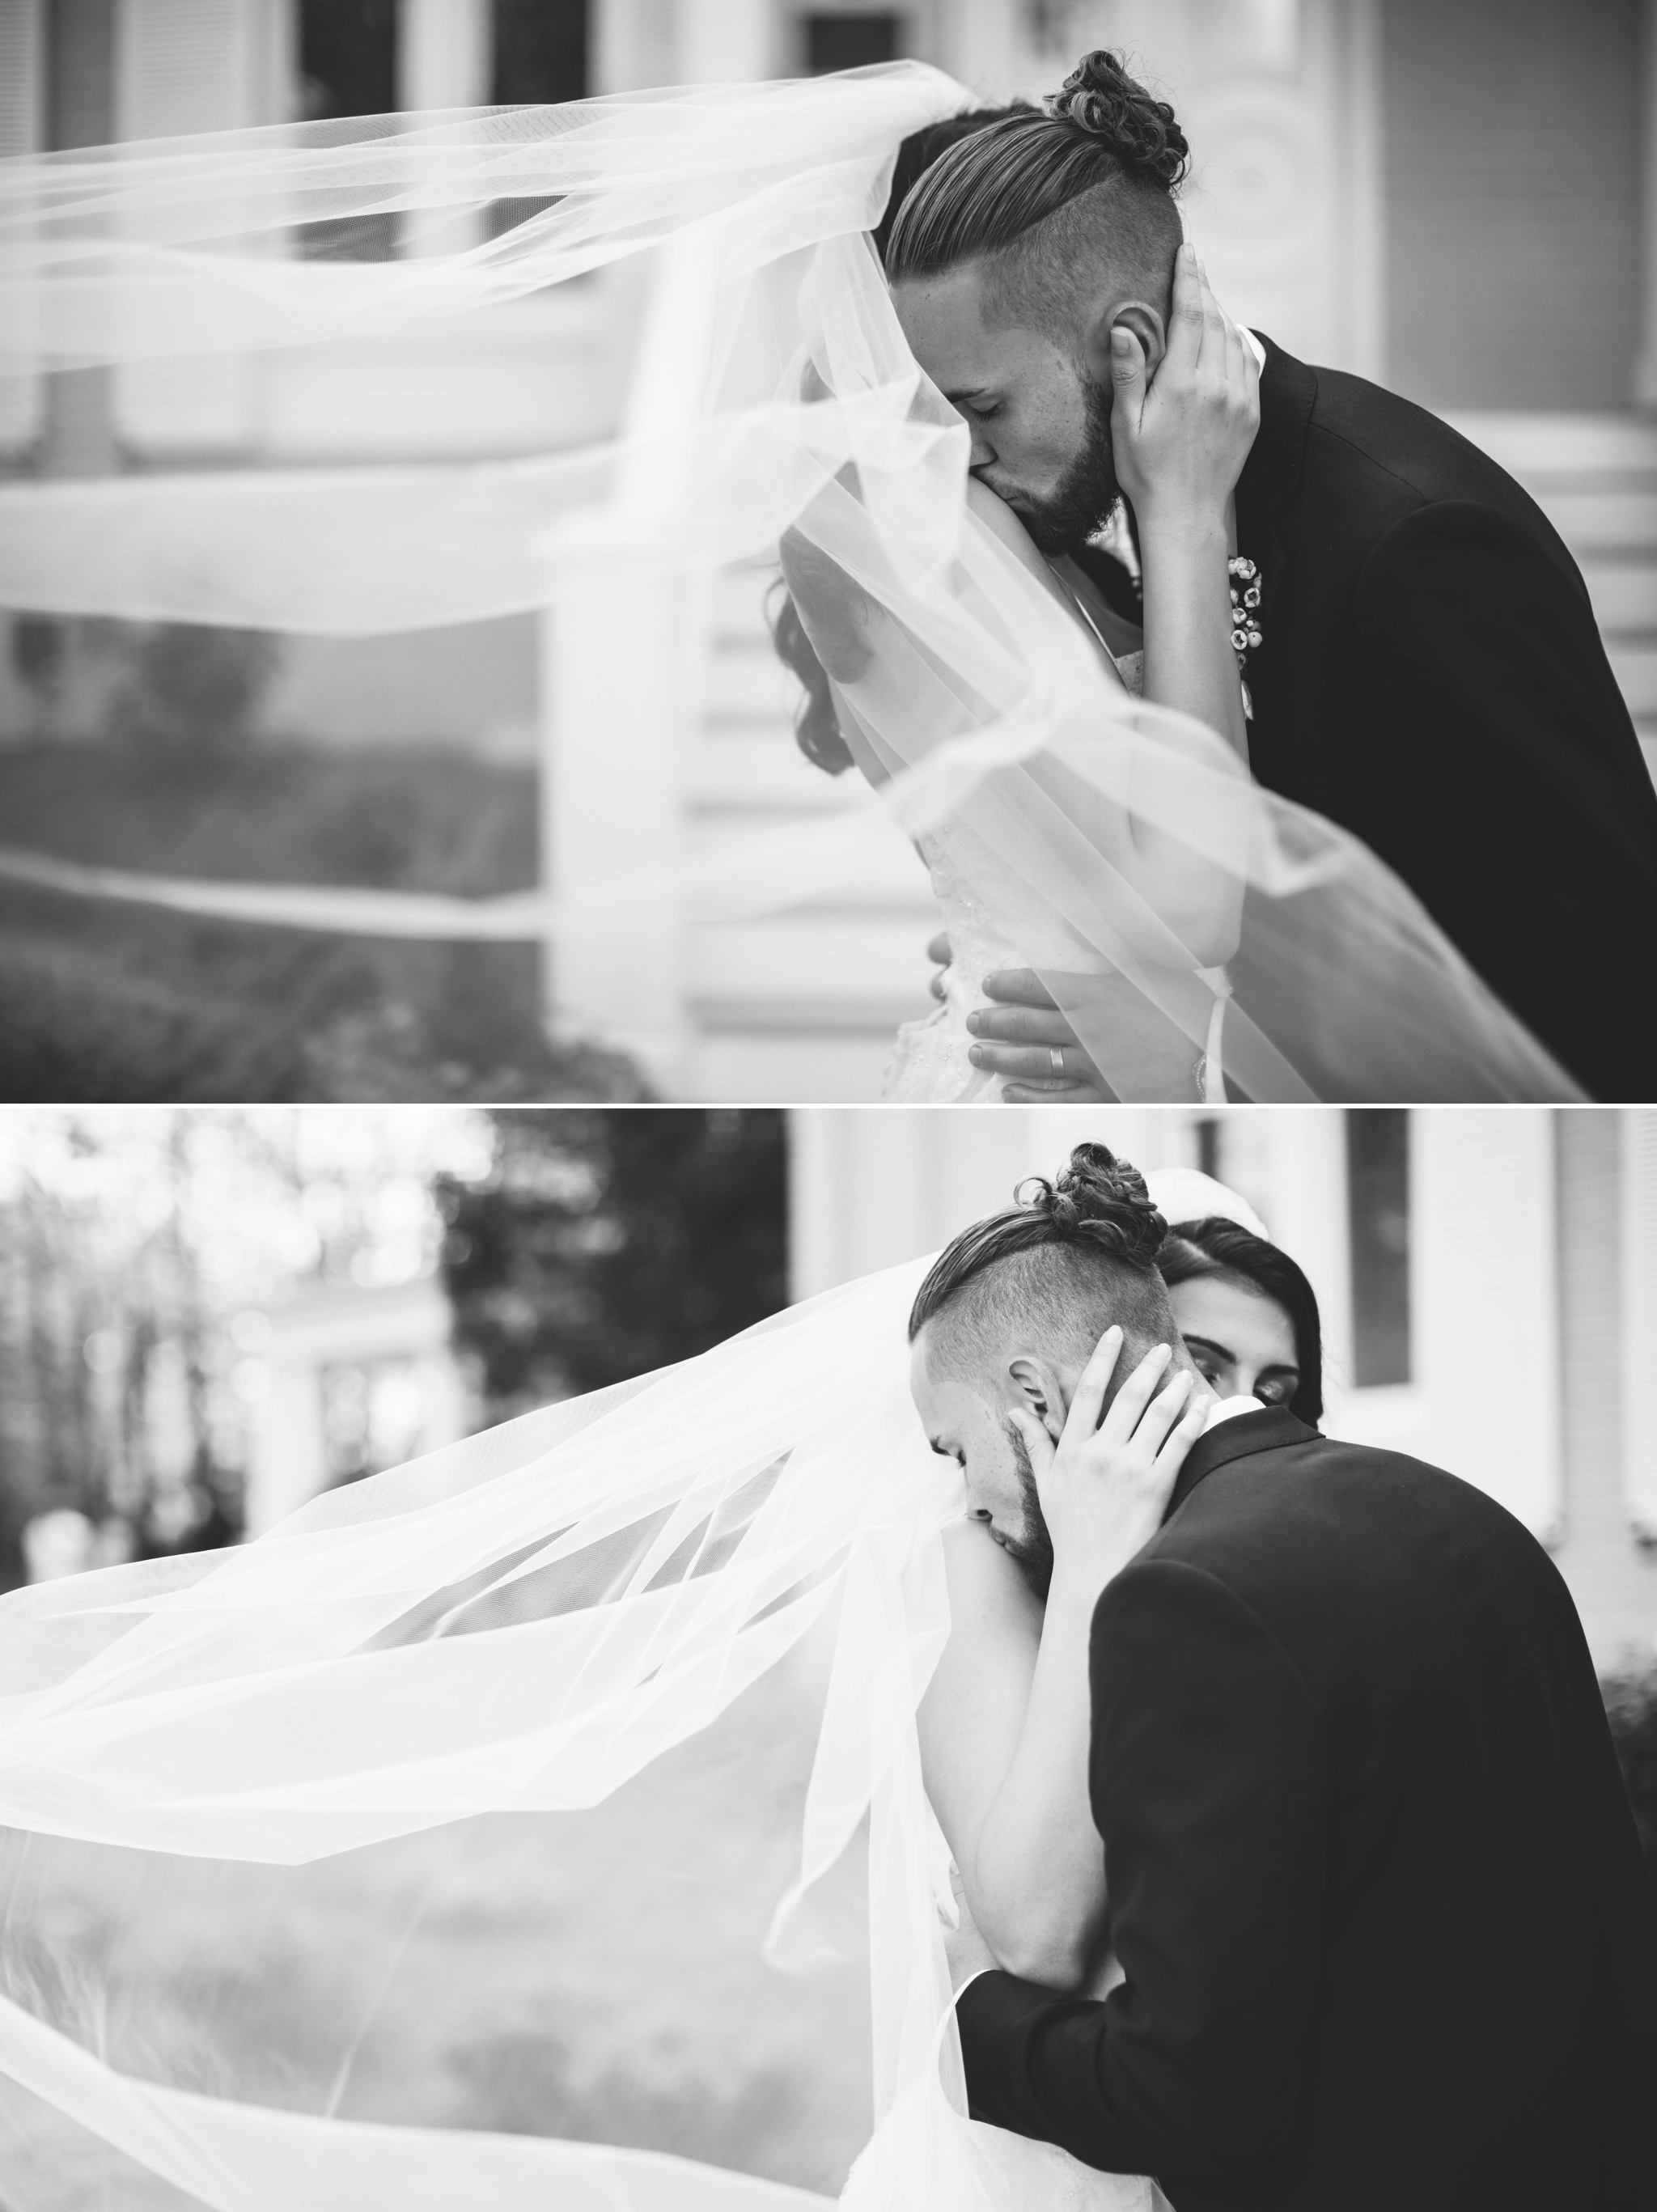  black and white Veil shot - Wedding Portraits on the front porch of an all white luxury estate - Bride is wearing a Aline Ballgown by Cherish by Southern Bride with a long cathedral veil - Groom is wearing a black suit by Generation Tux and has a ma